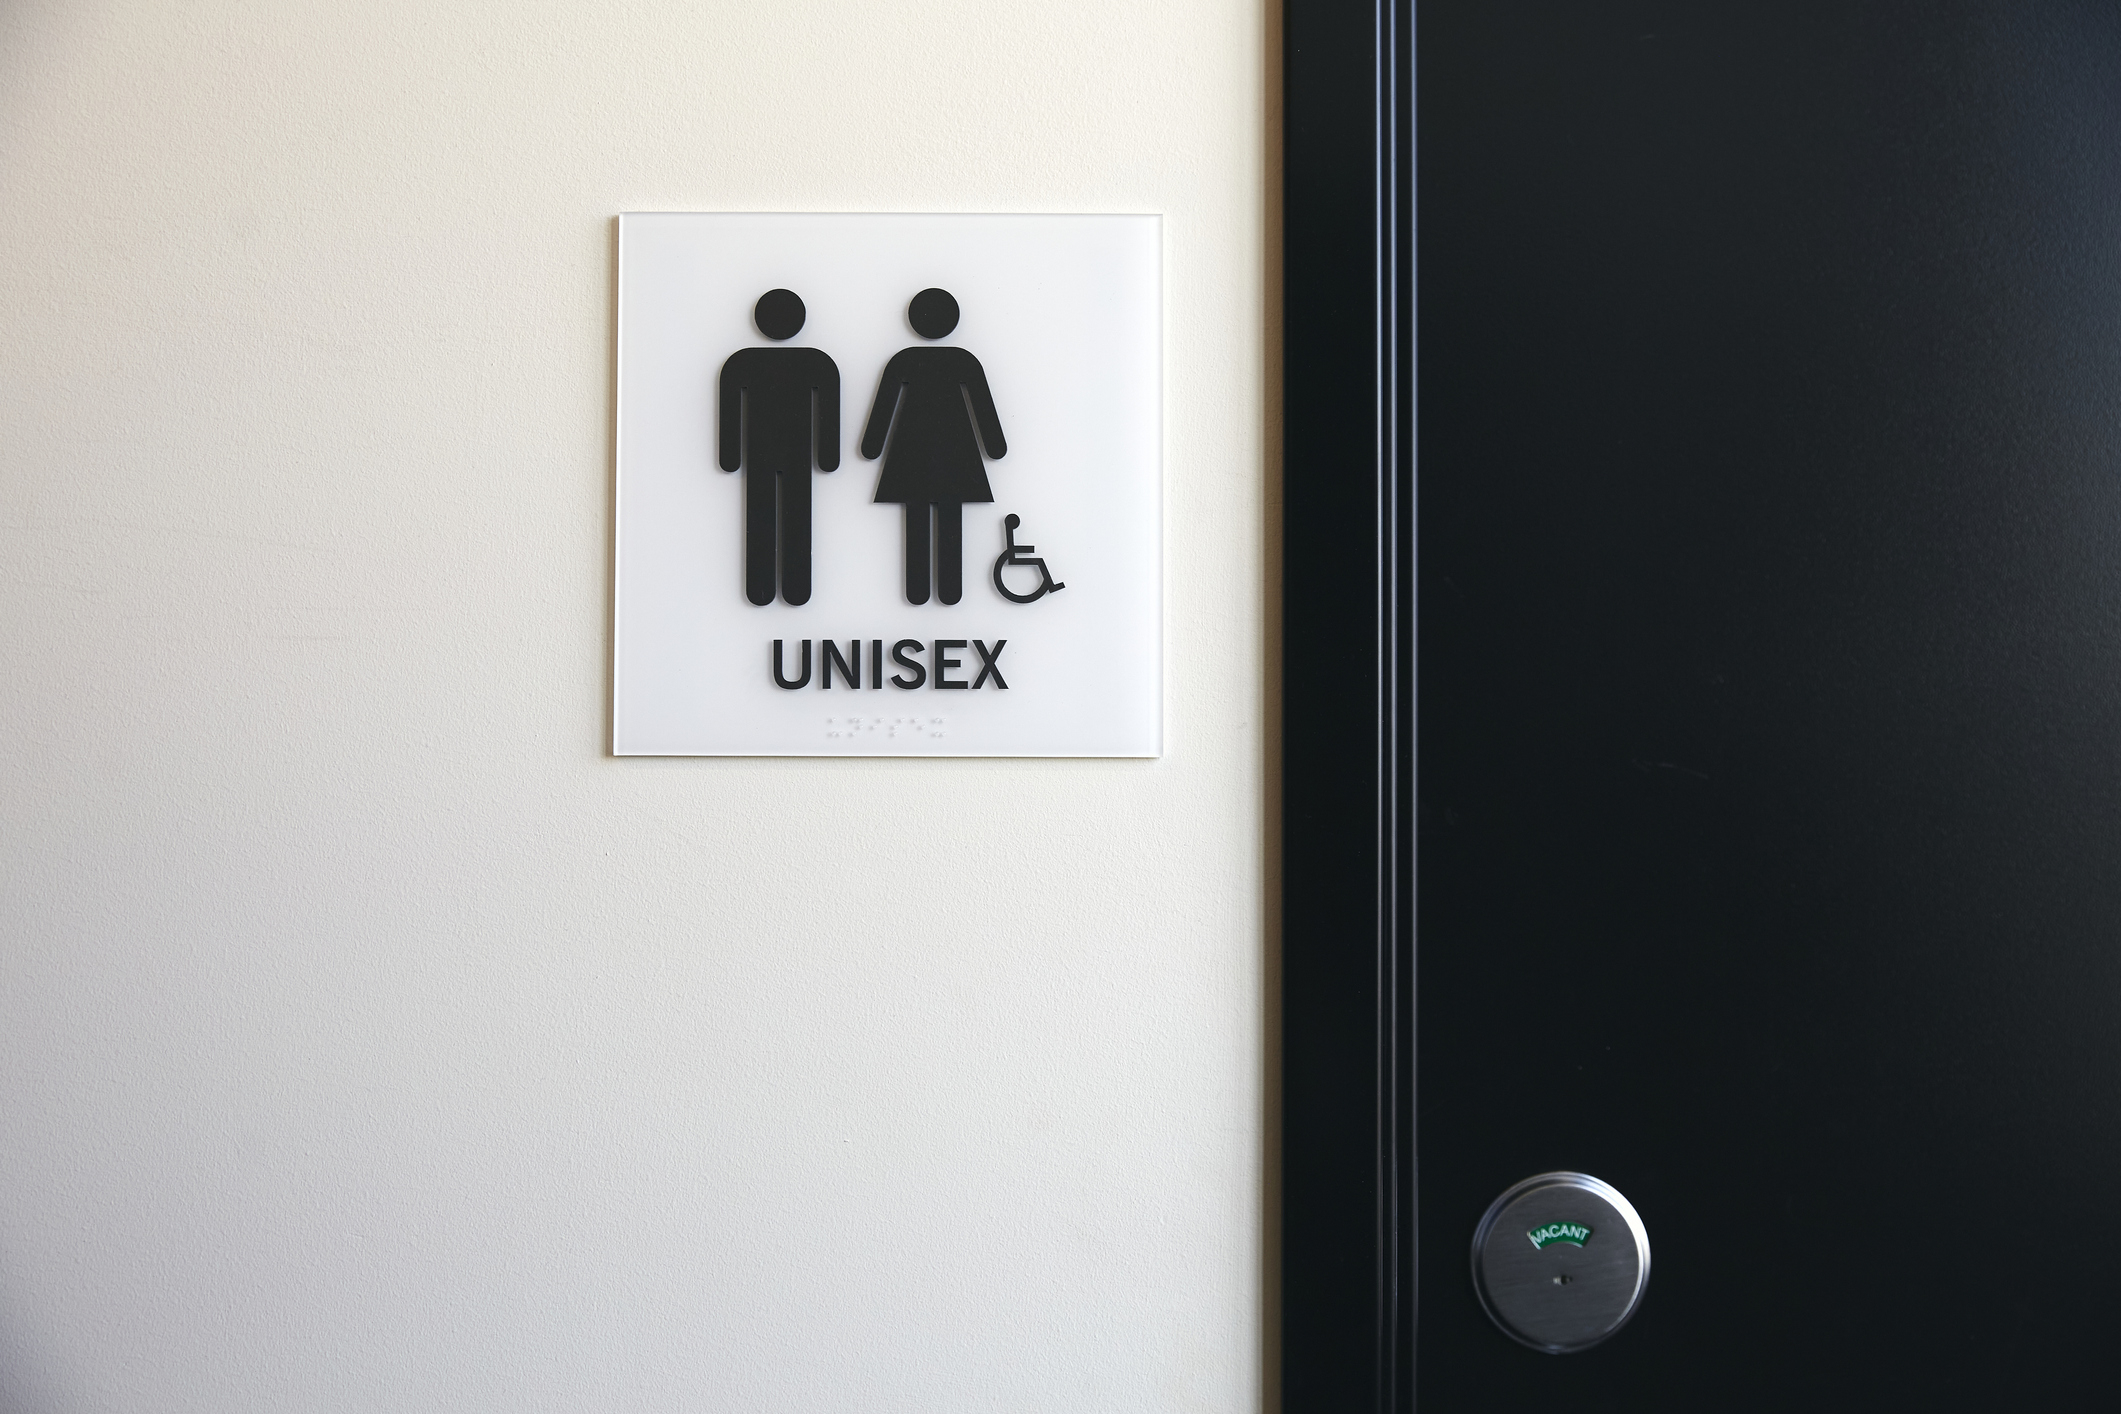 Unisex bathroom sign with symbols for all genders and accessibility feature